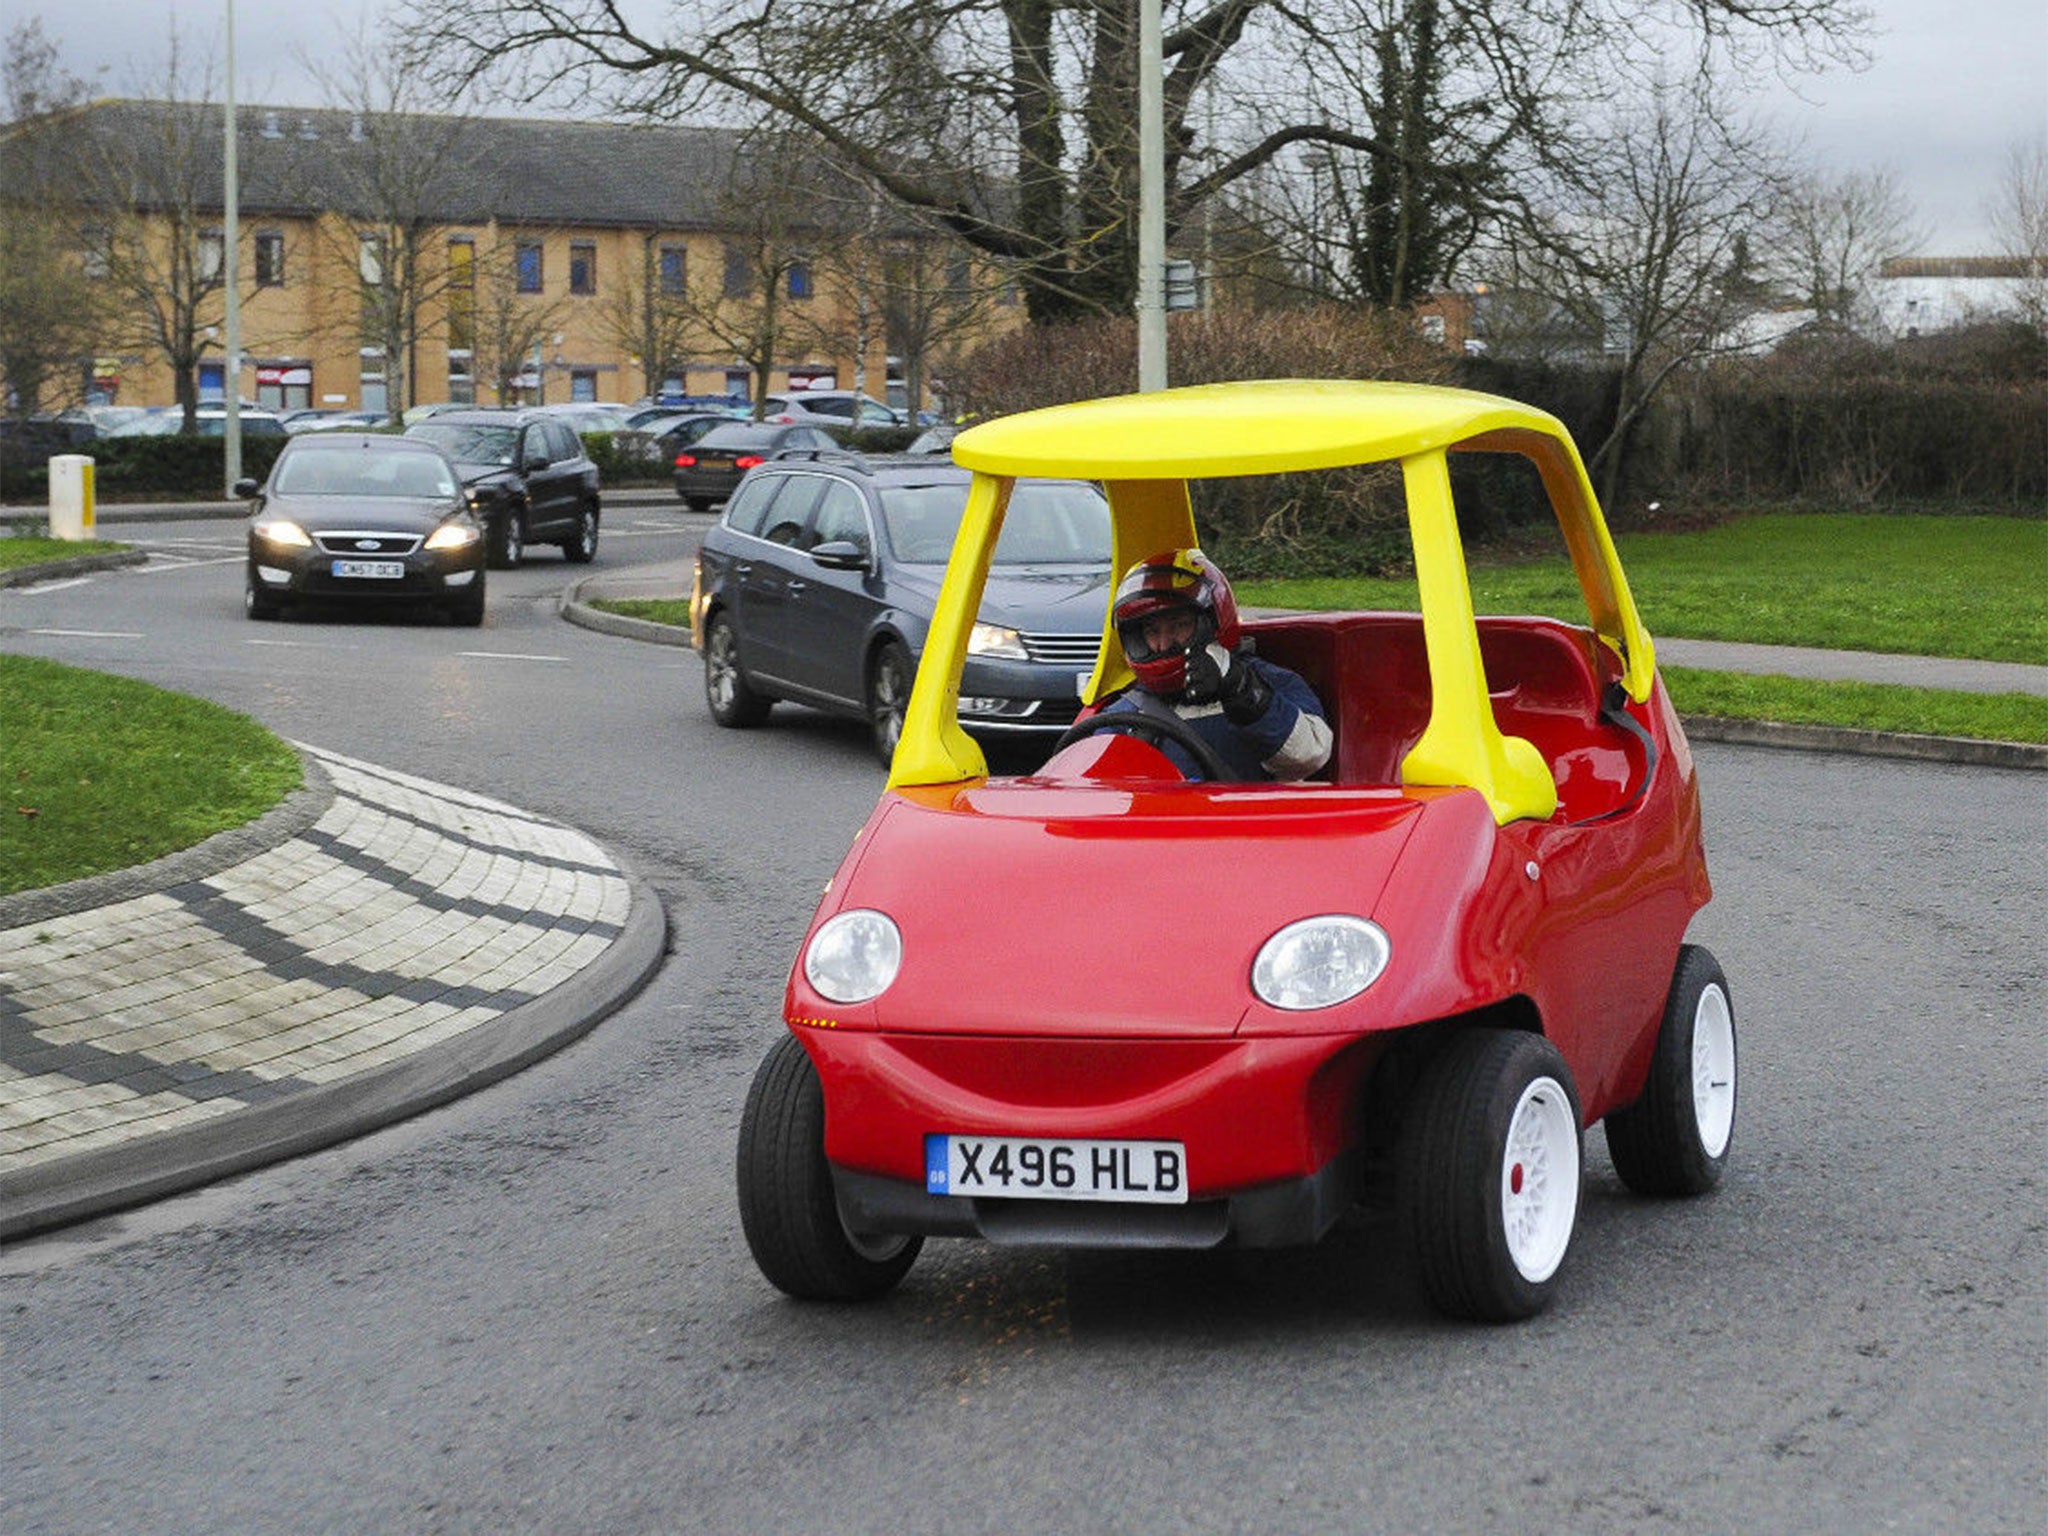 Image from a listing for the adult-sized Cozy Coupe